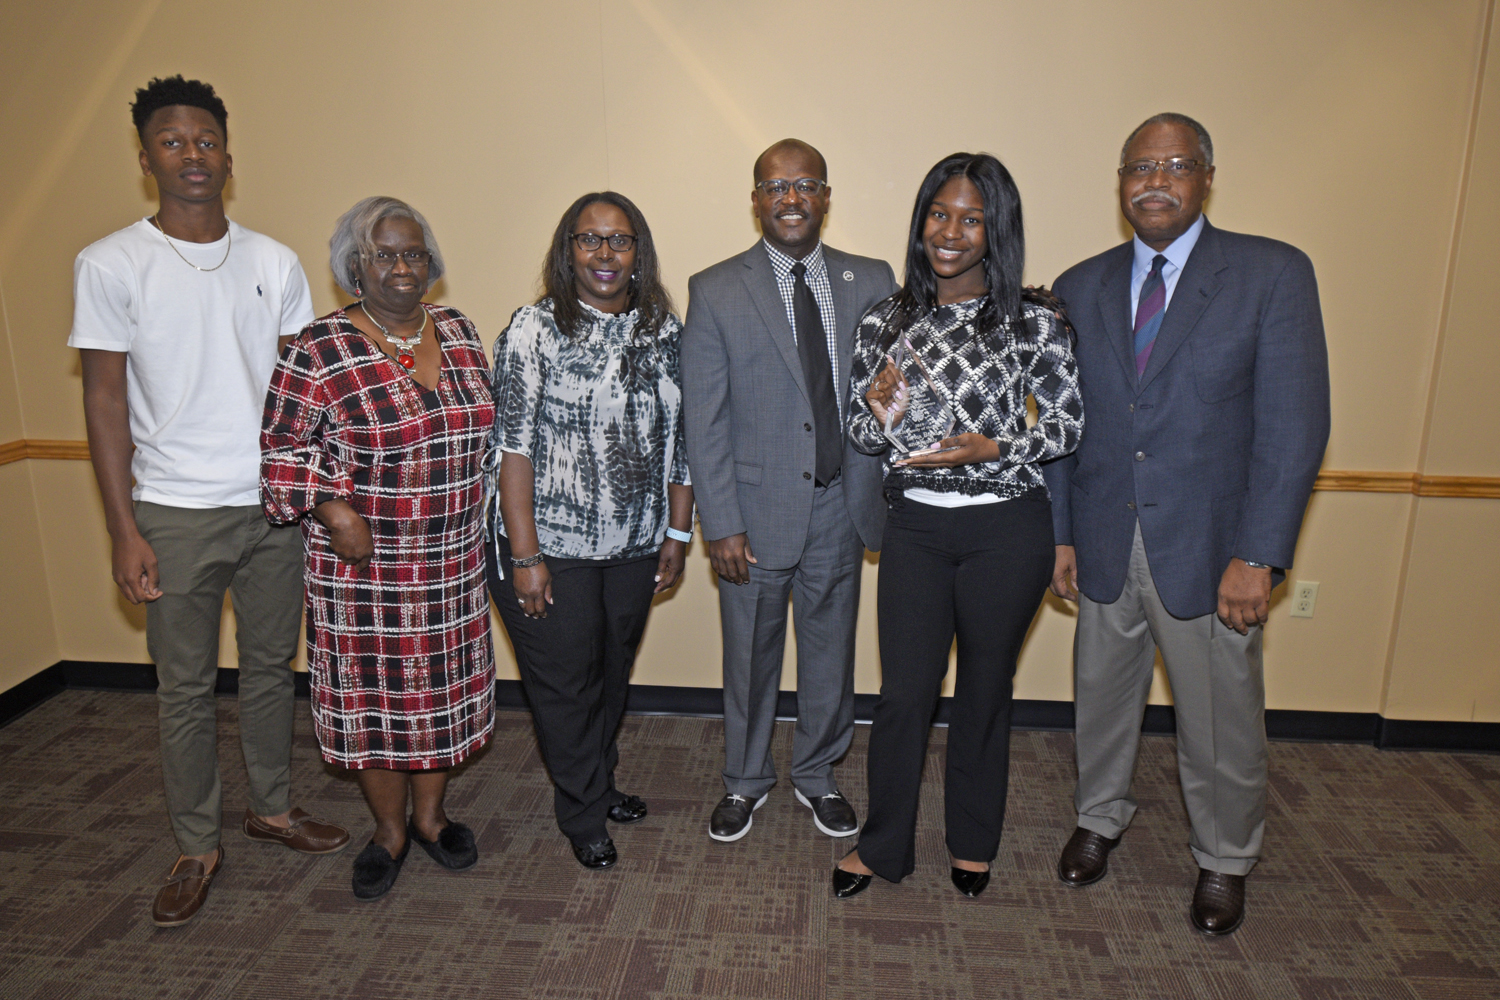 Phillip Petway (fourth from left) and Dr. Mark Latimore Jr. (far right), FVSU Extension administrator, presents Terrica Bond (second from right) and her family with the 4-H Family of the Year Award.